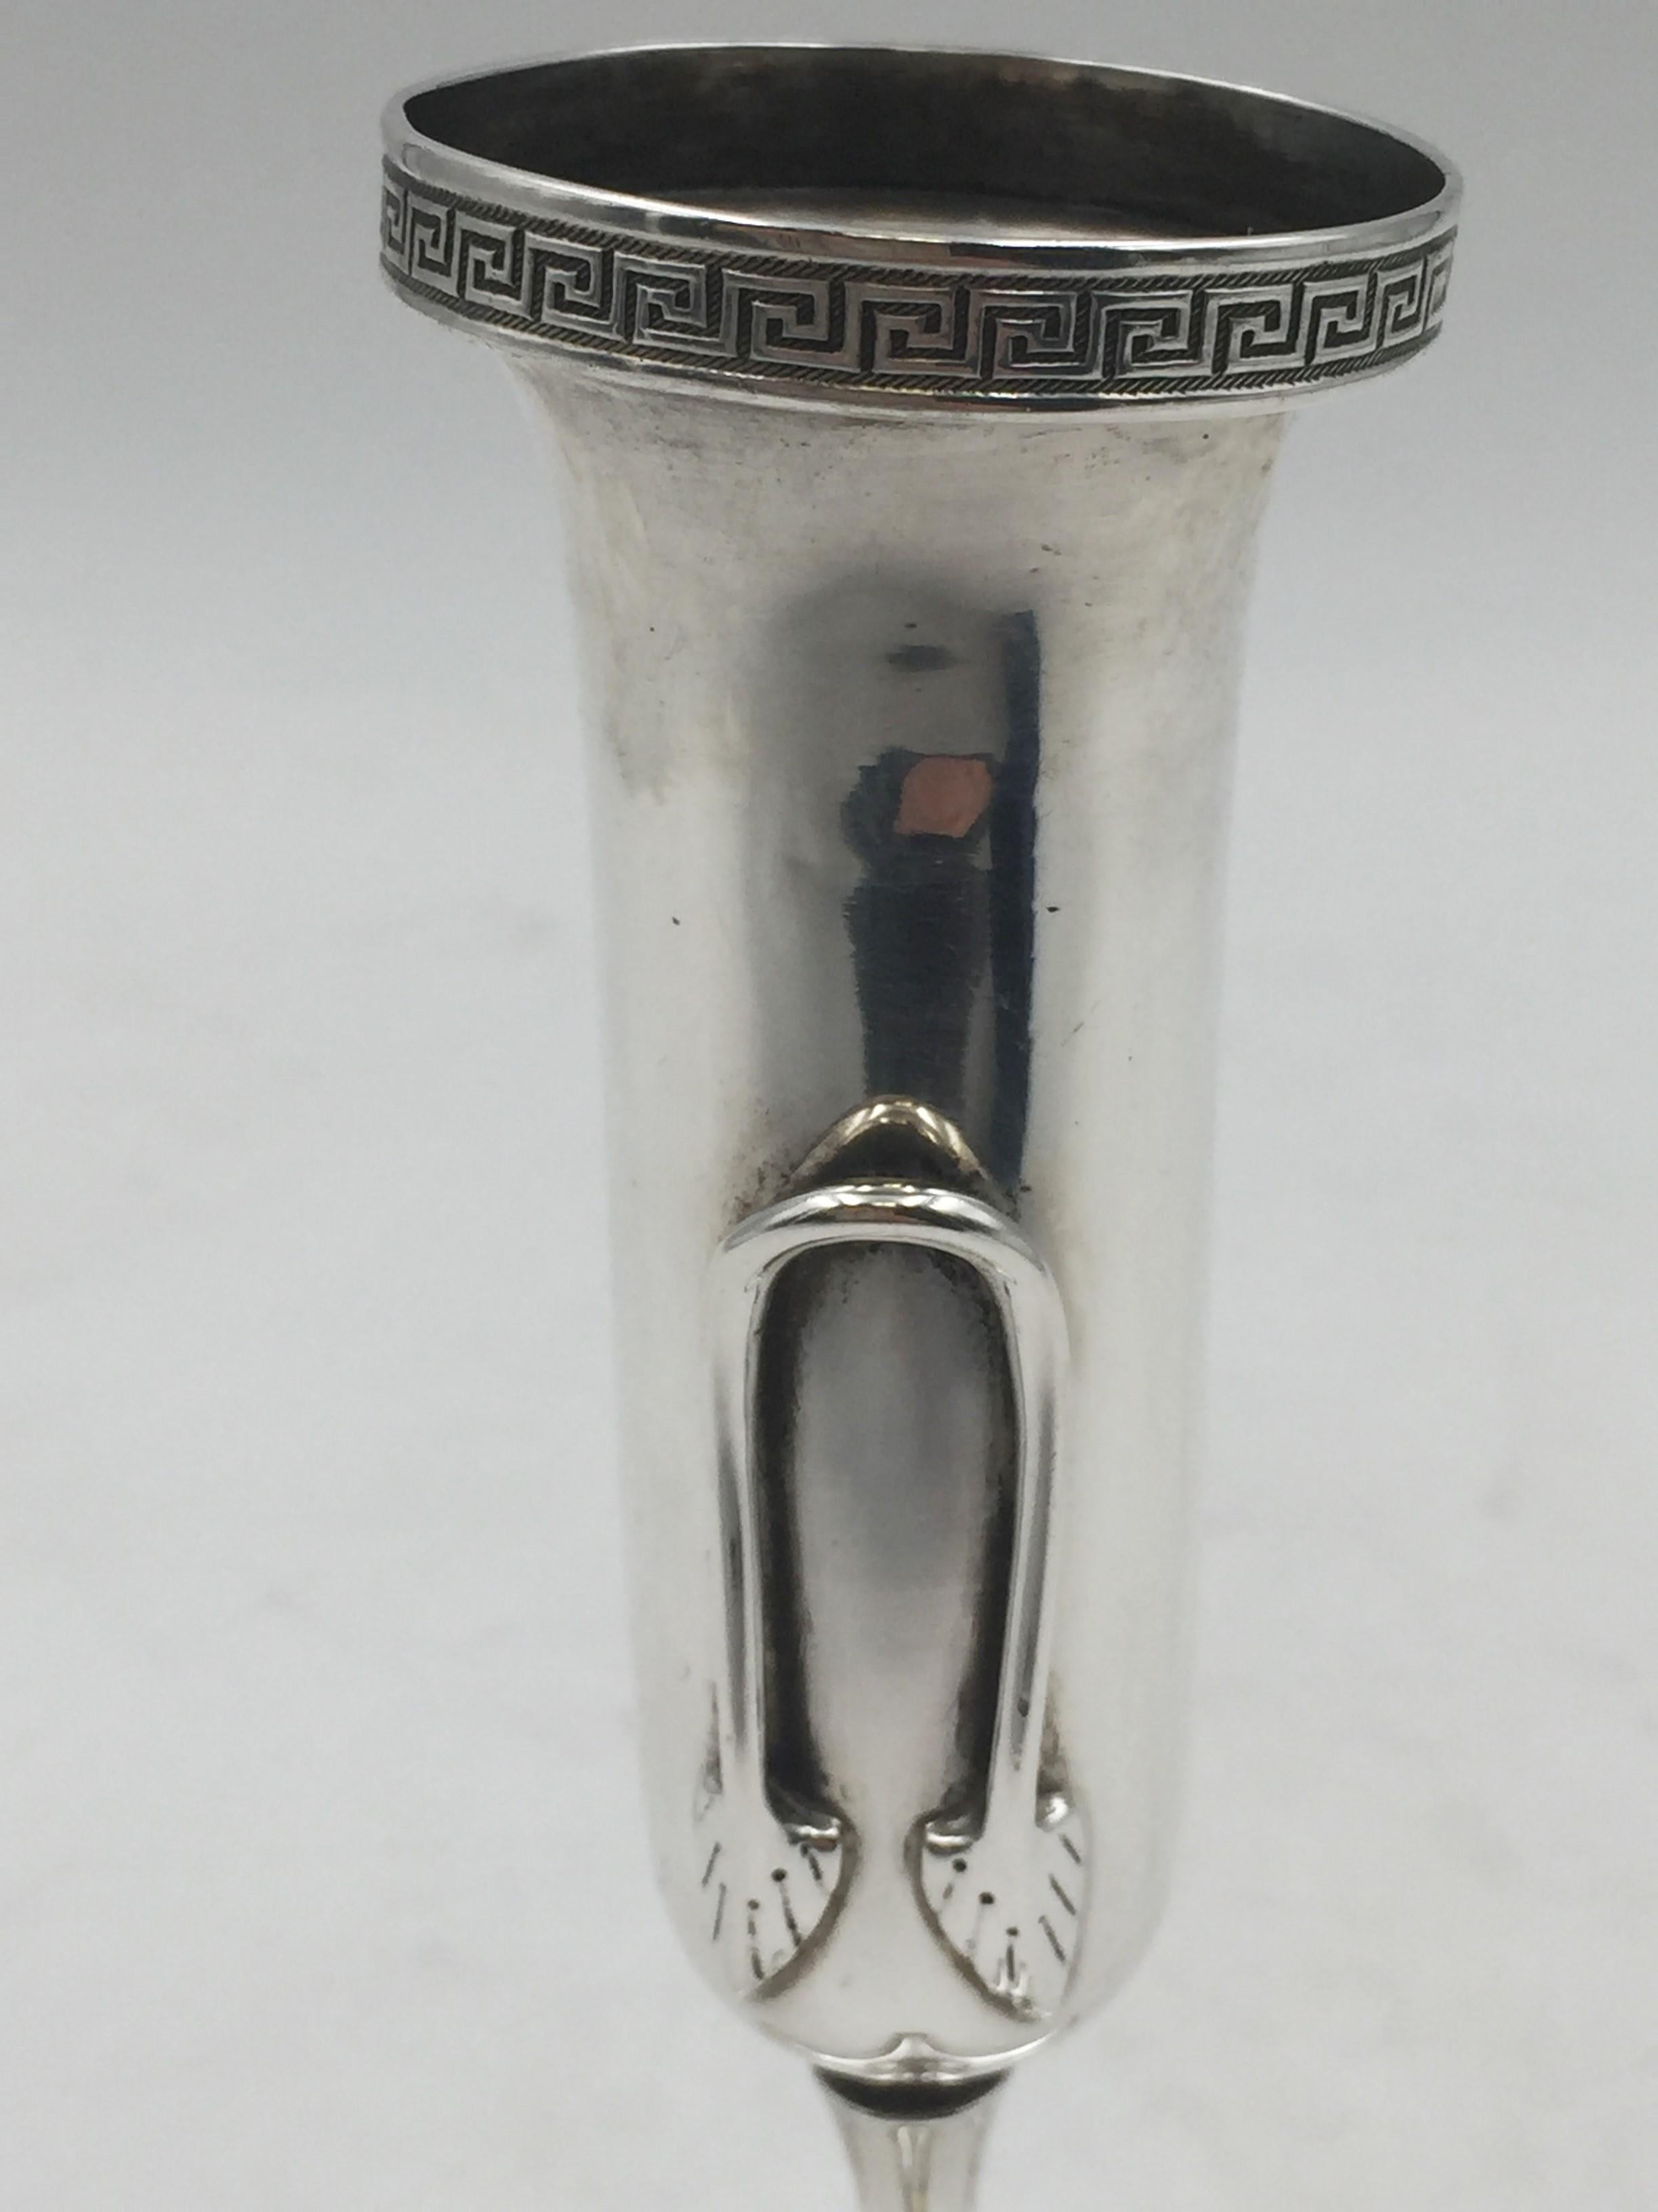 Appliqué Gorham Sterling Silver 1850s Bud Vase in Neoclassical Style